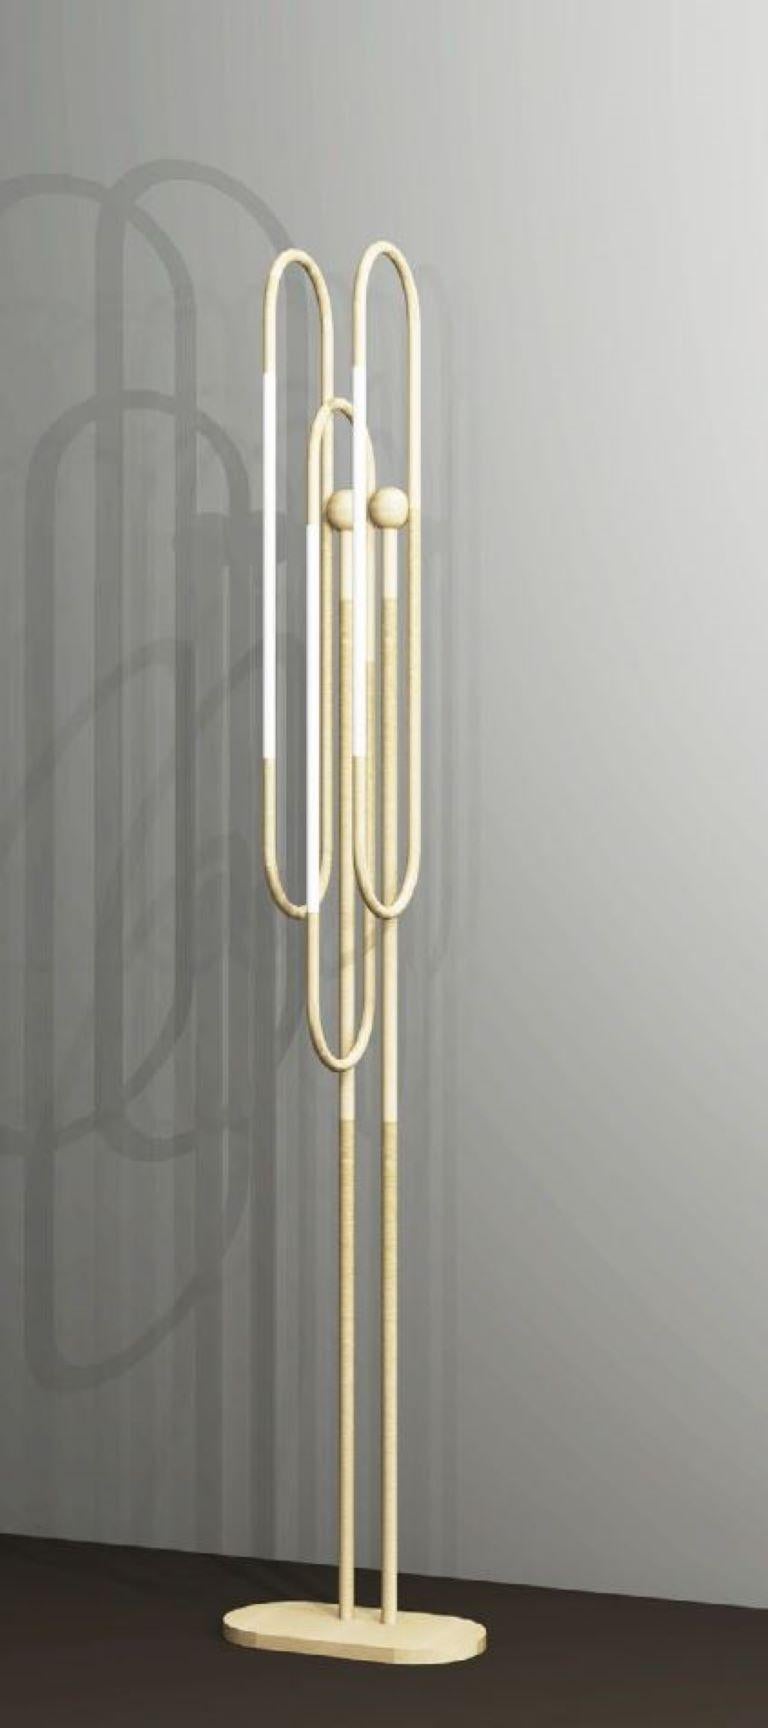 This floor lamp is based on infinite loops of brass, coiling continuously to create a free and fluid structure, with subtly integrated lighting elements.
Finishes: brushed brass and opal glass

Height: 1500mm
Width: 120mm
Depth: 100mm
Rod Dia: